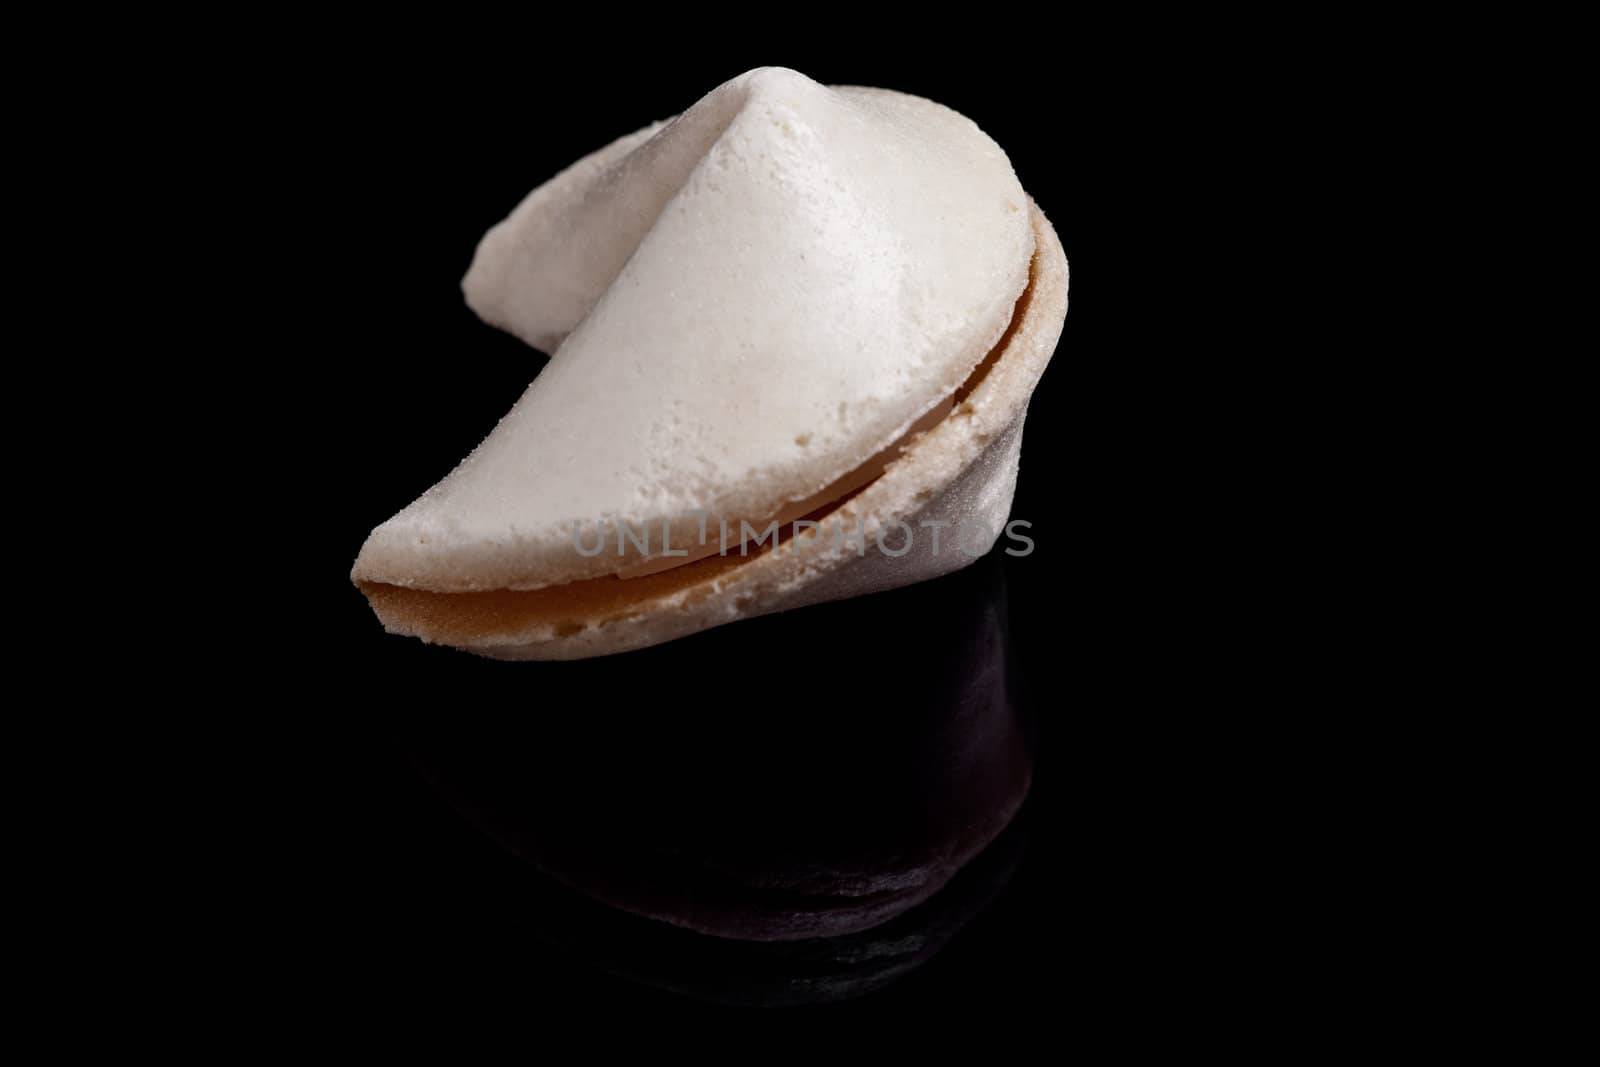 The crispy Fortune cookie image on black background